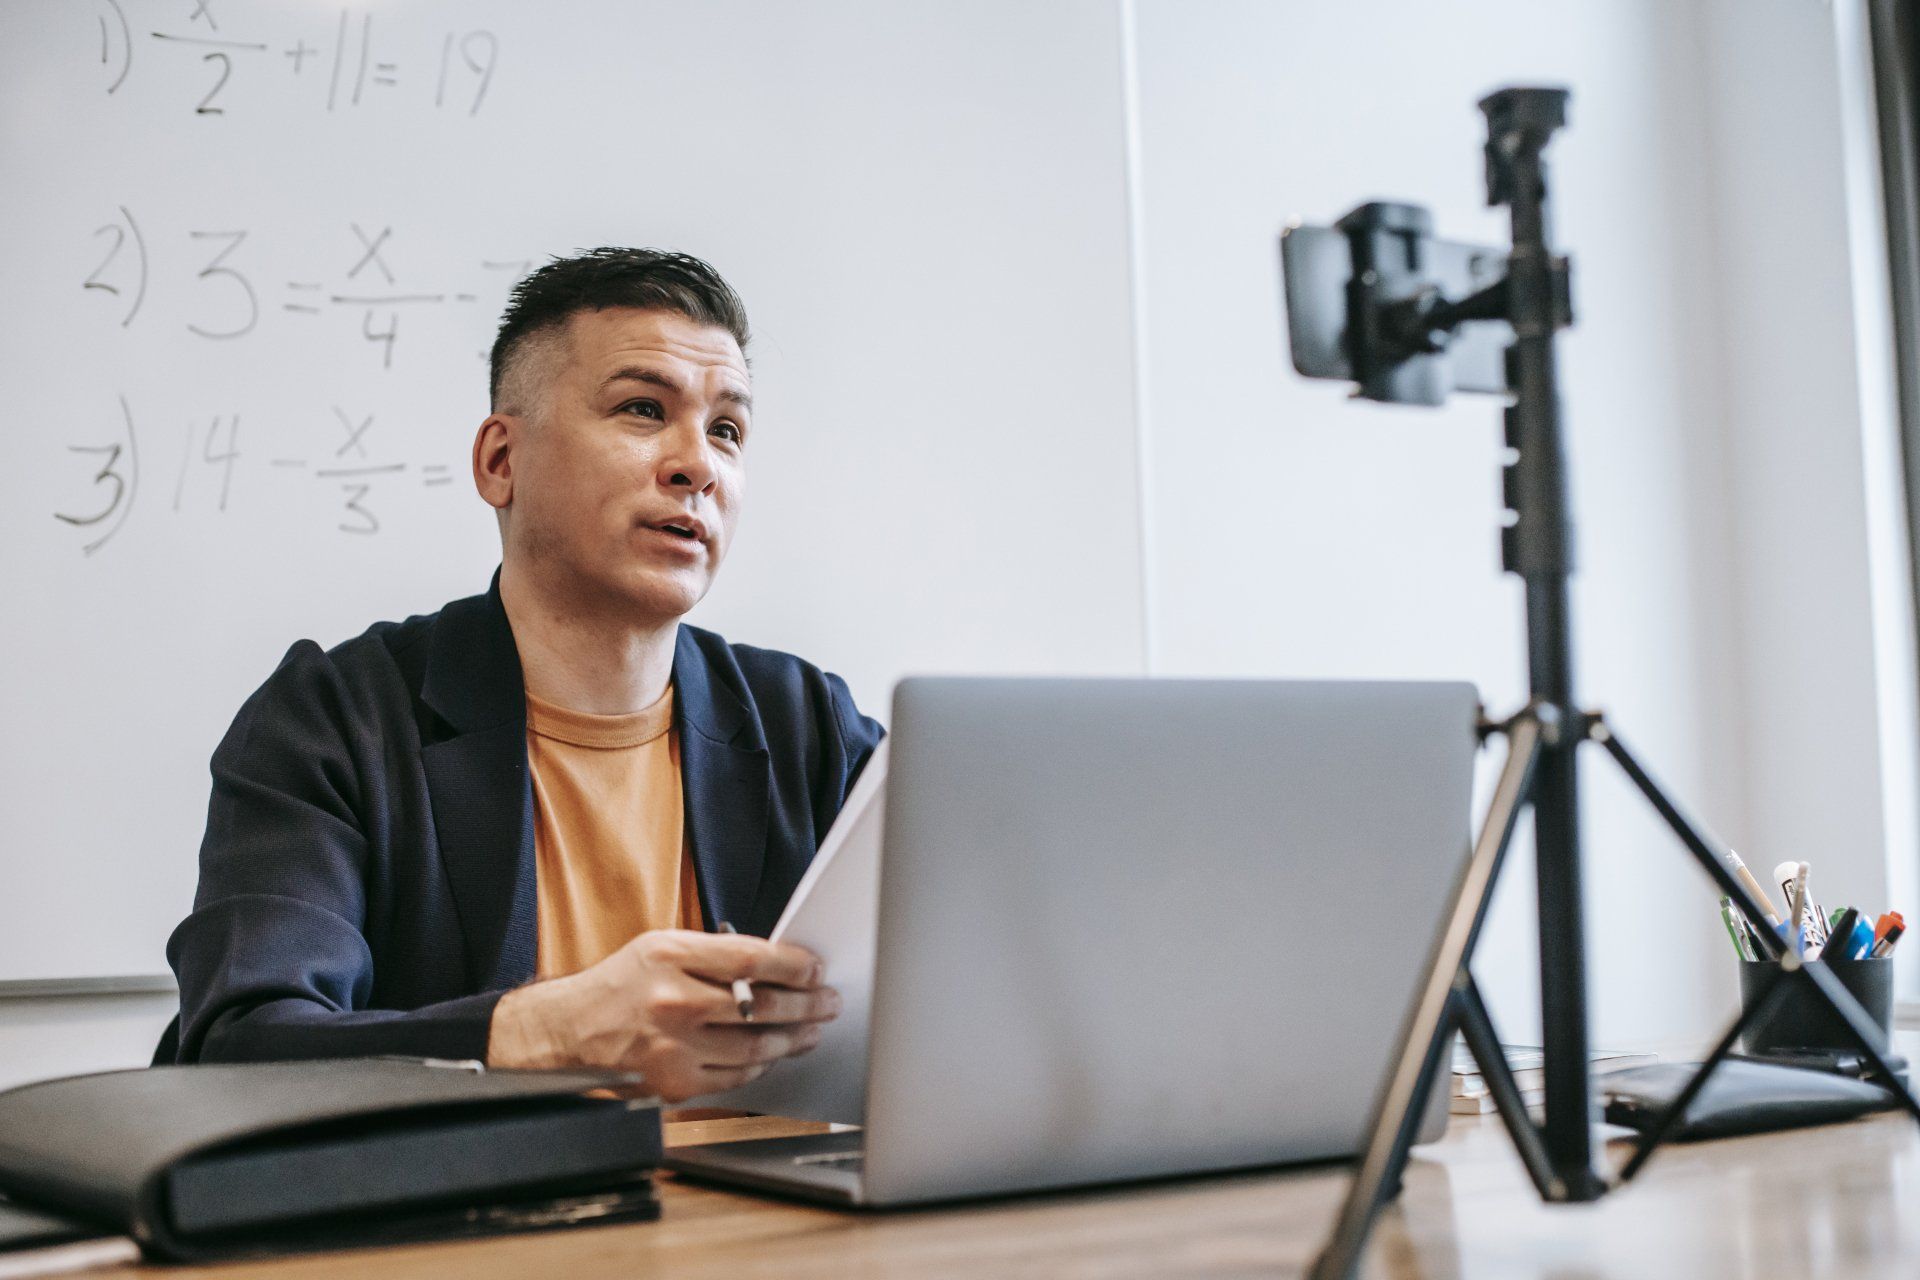 A professor in front of a whiteboard speaks to a camera during a virtual event